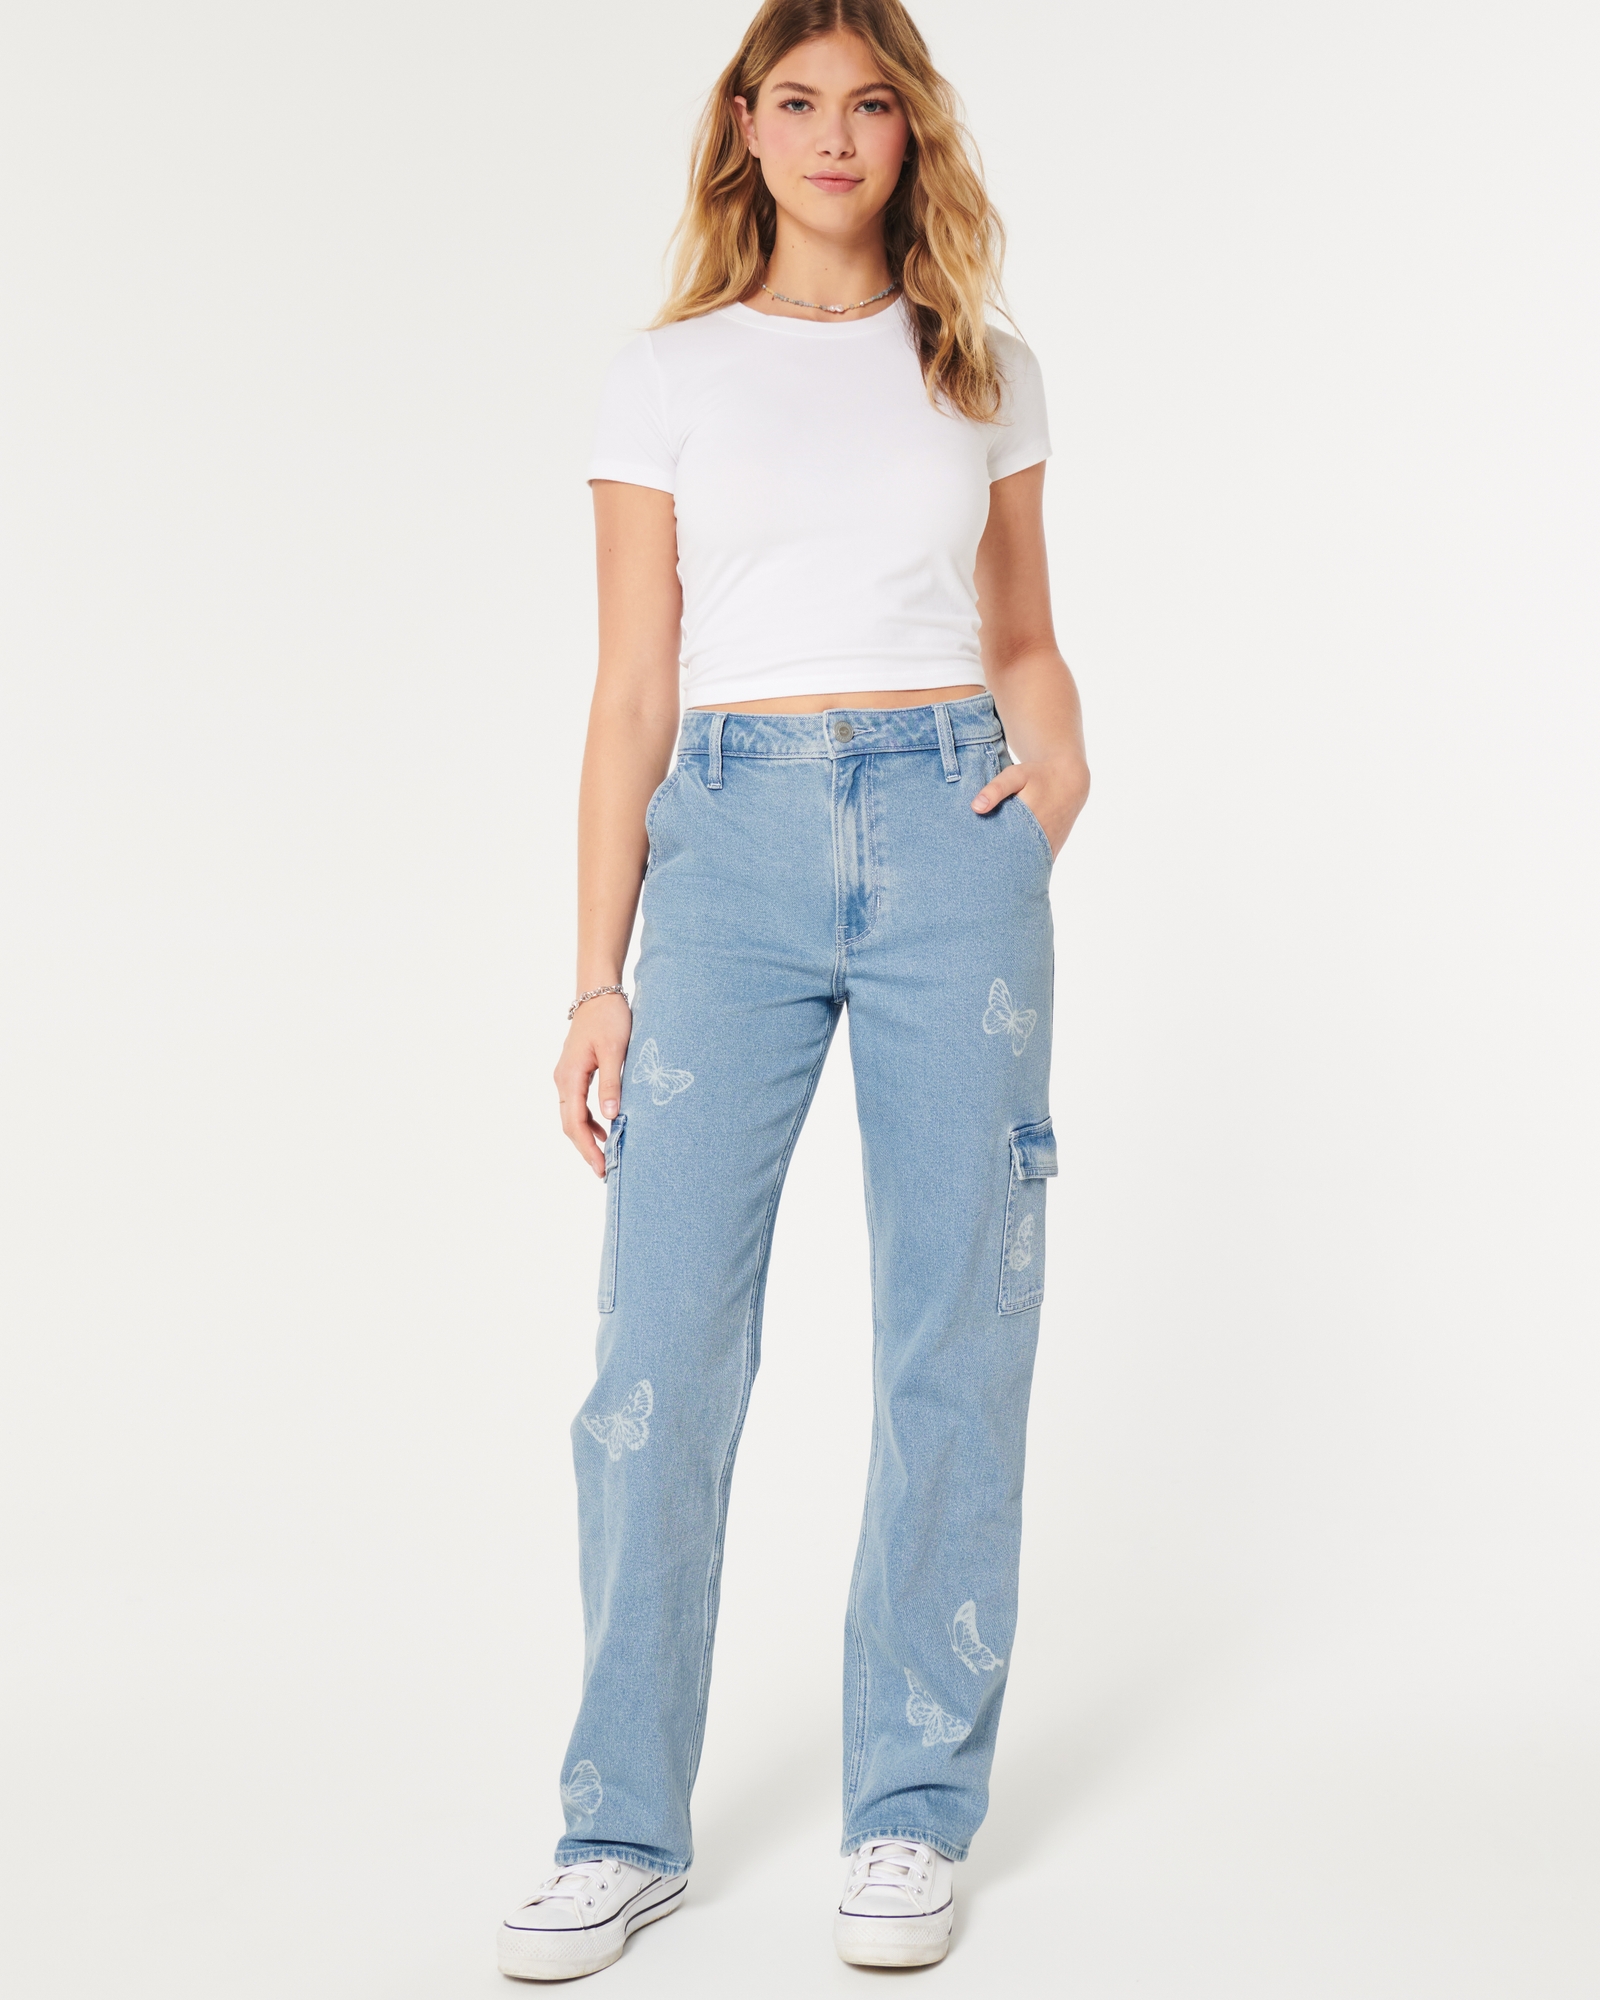 Women's Ultra High-Rise Light Wash Dad Jeans